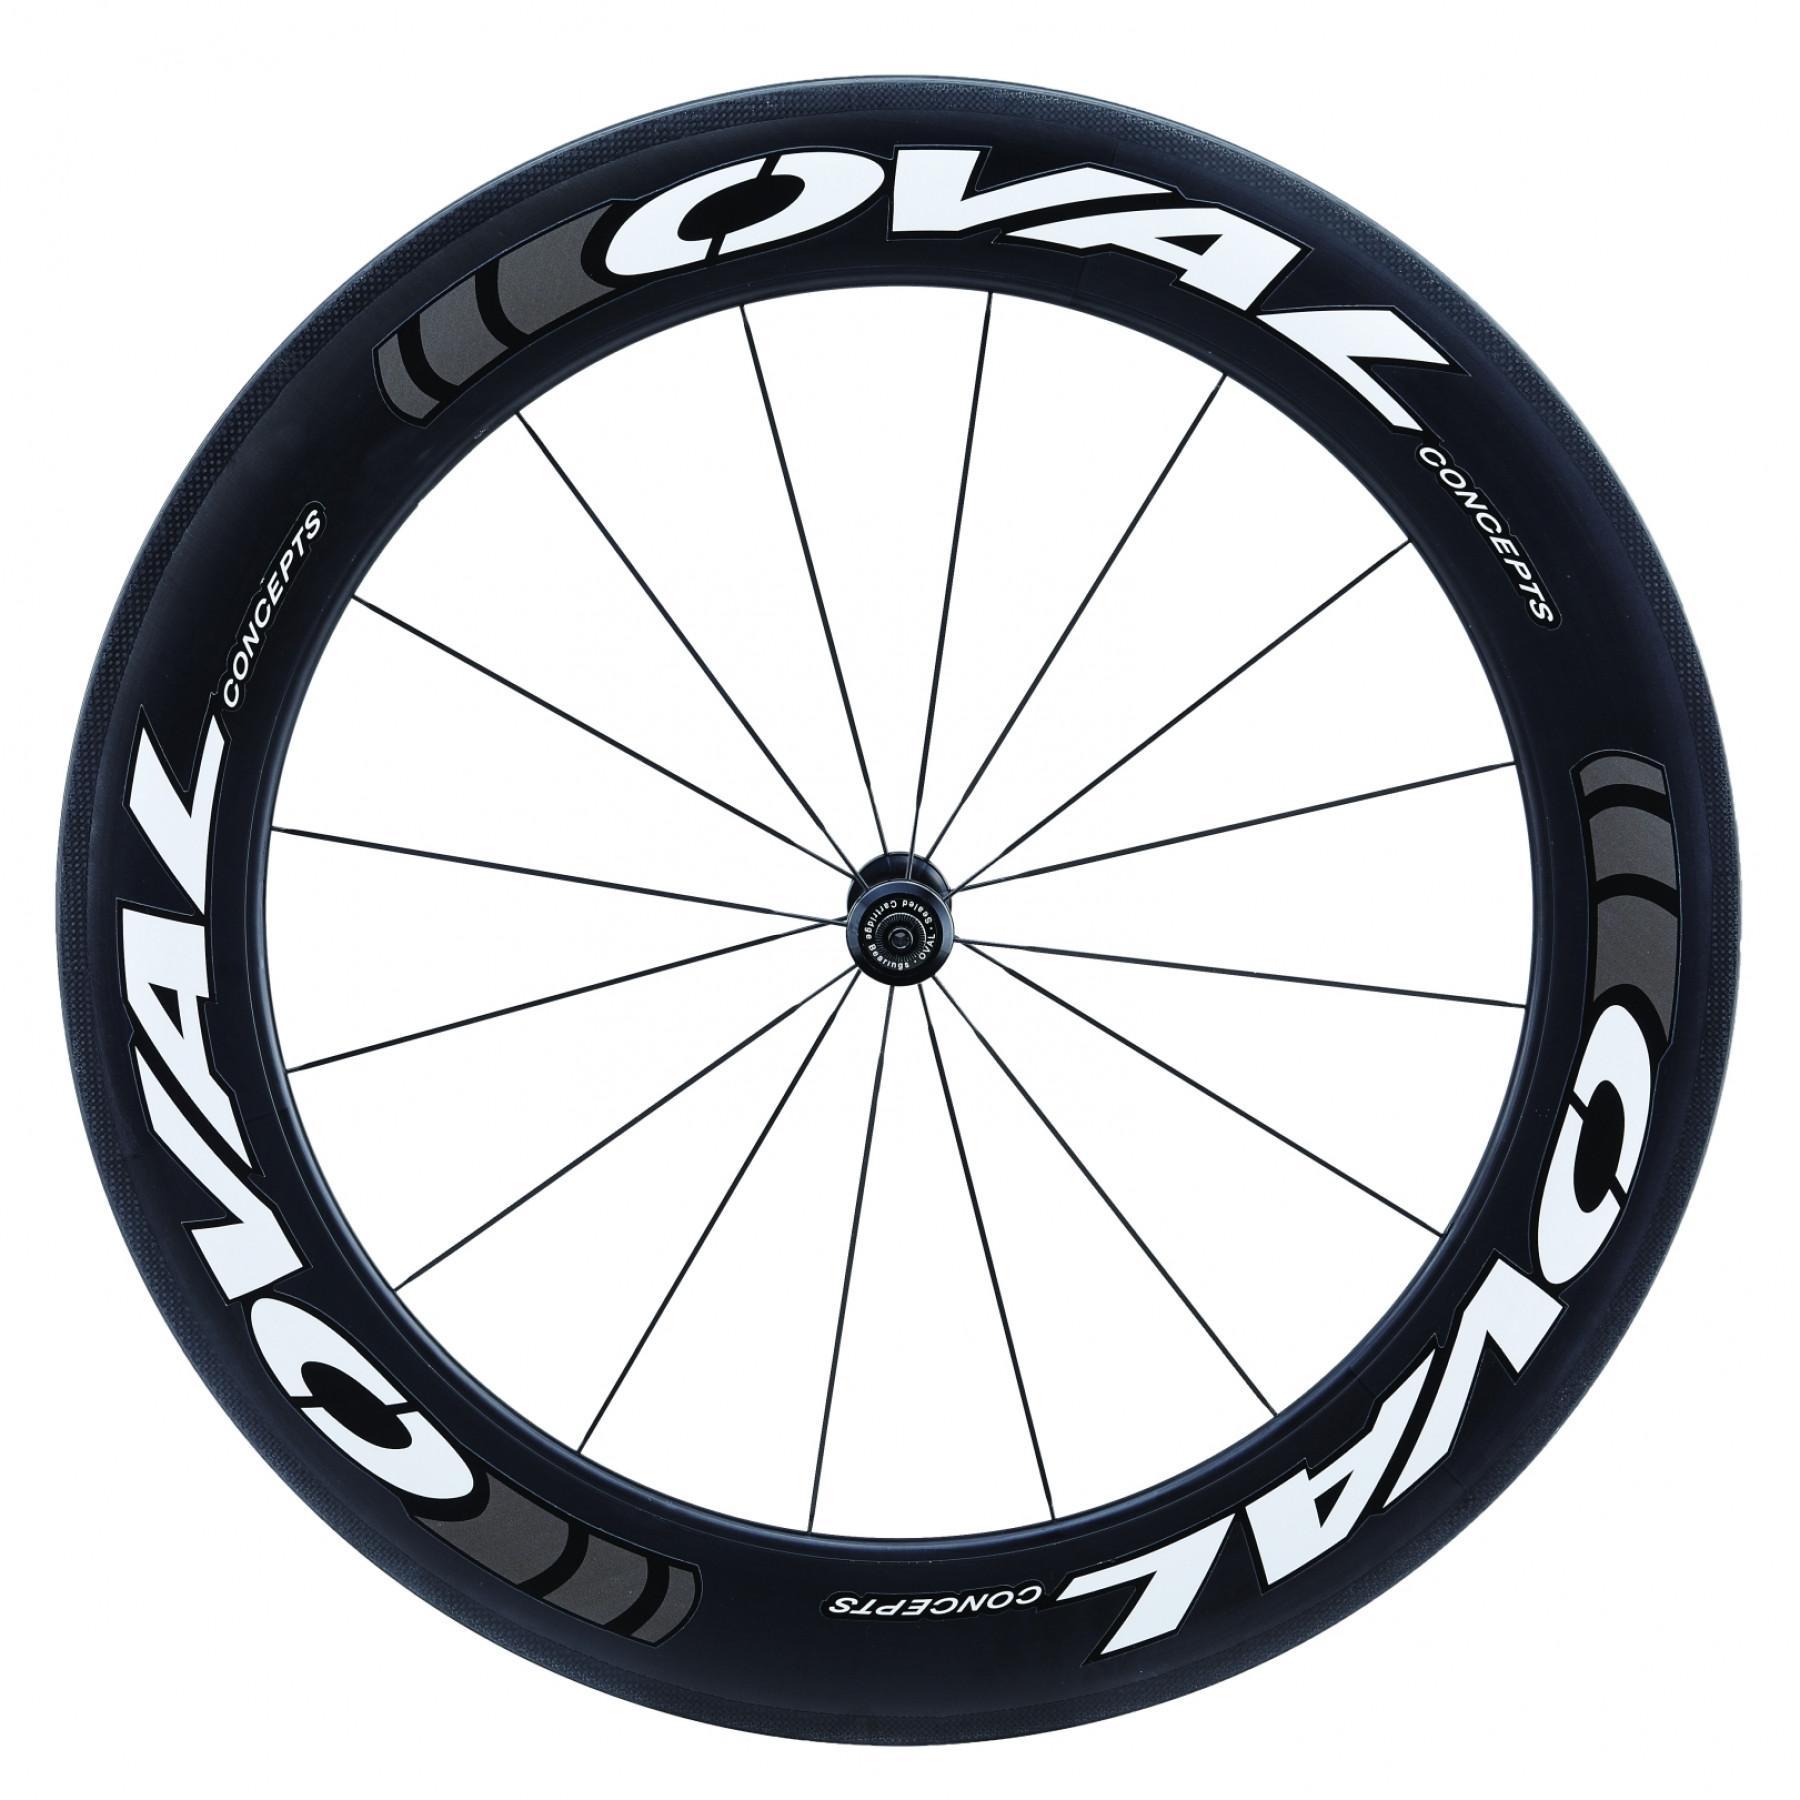 Orla Oval concepts Oval 980 Carbon Clincher 2017